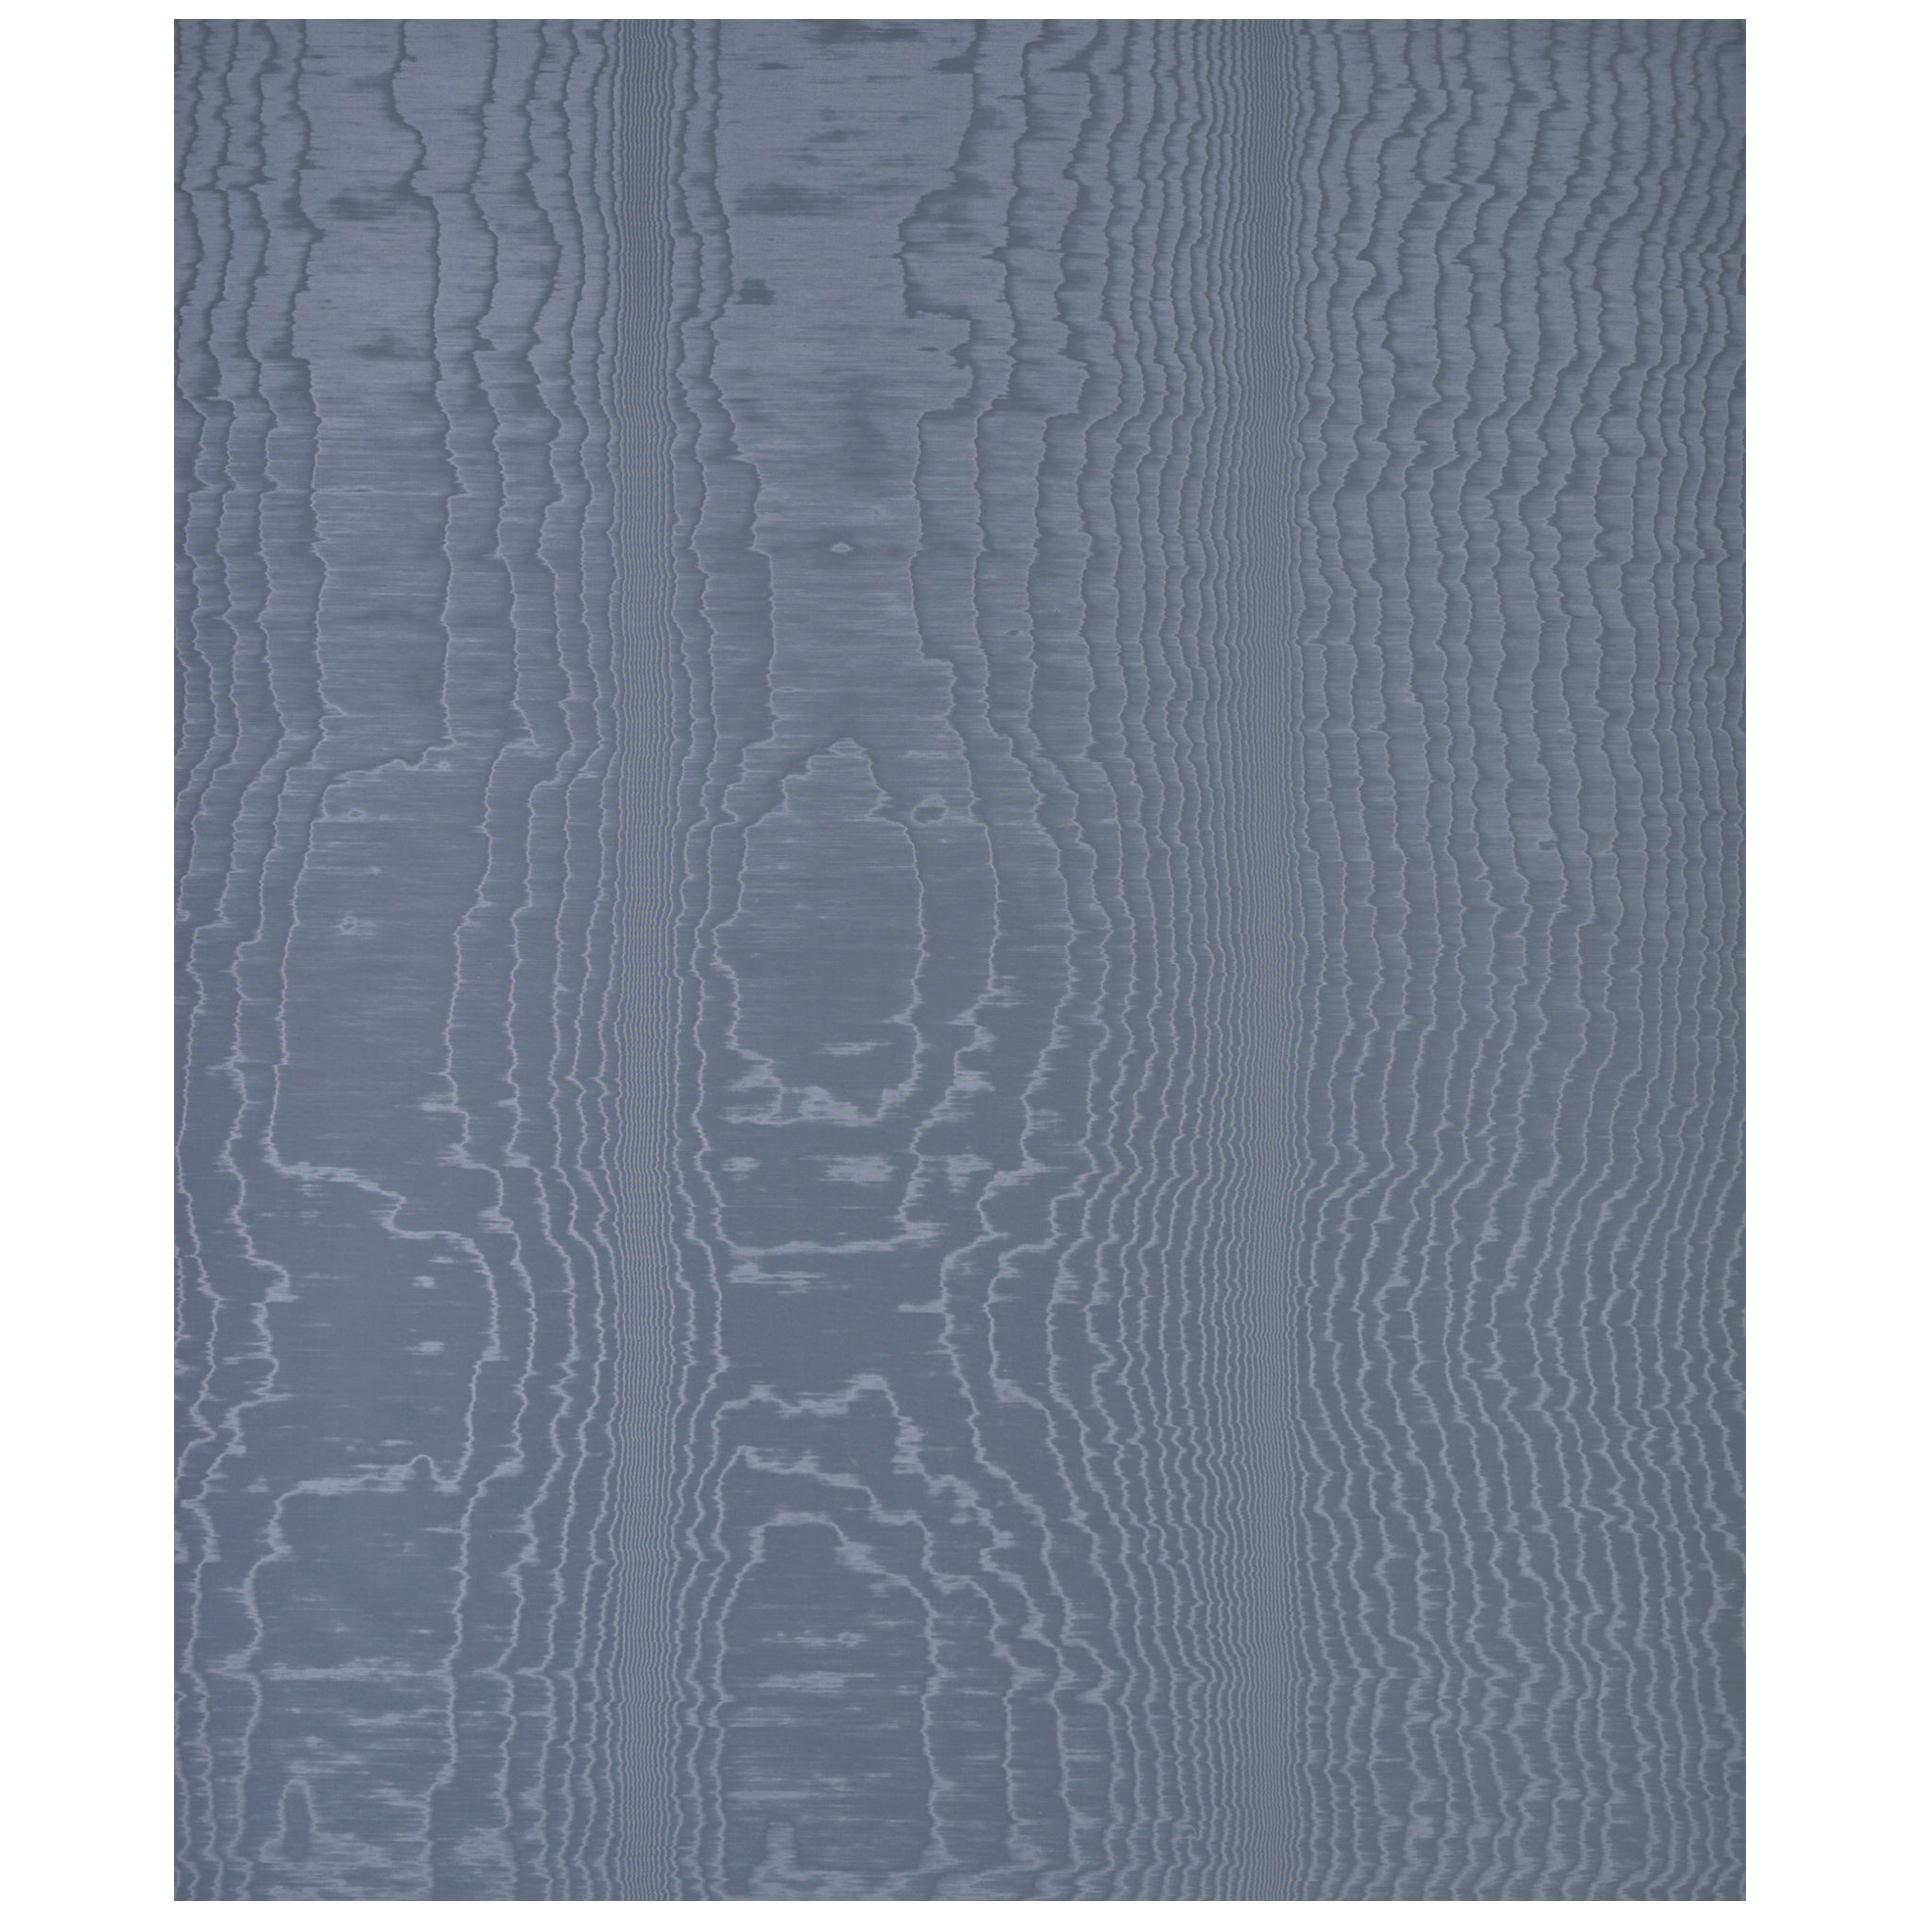 Schumacher Moiré Wall Covering in Ocean For Sale